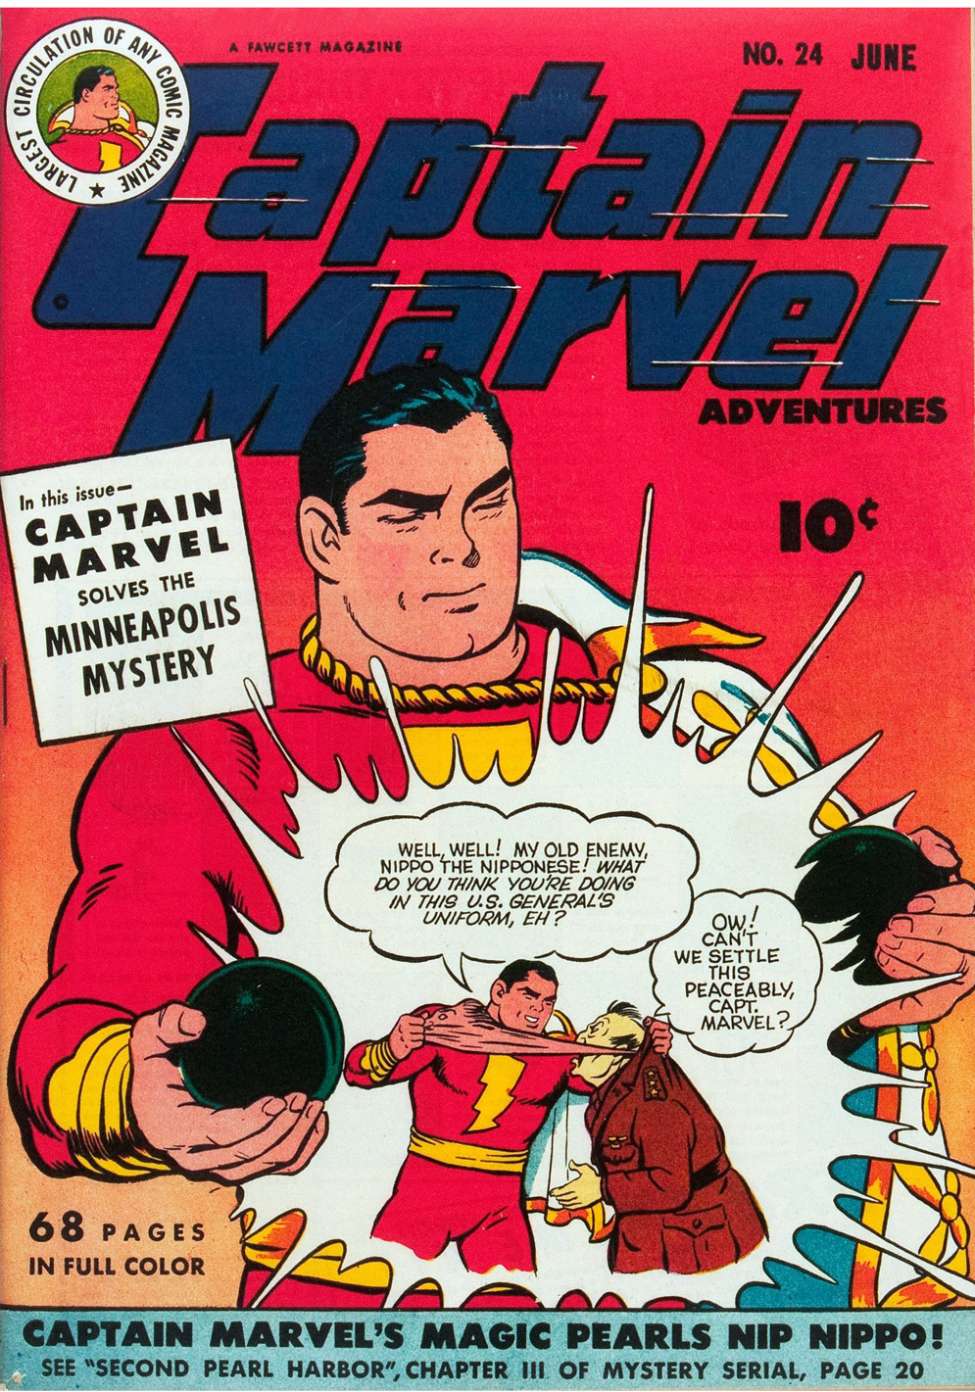 Comic Book Cover For Captain Marvel Adventures 24